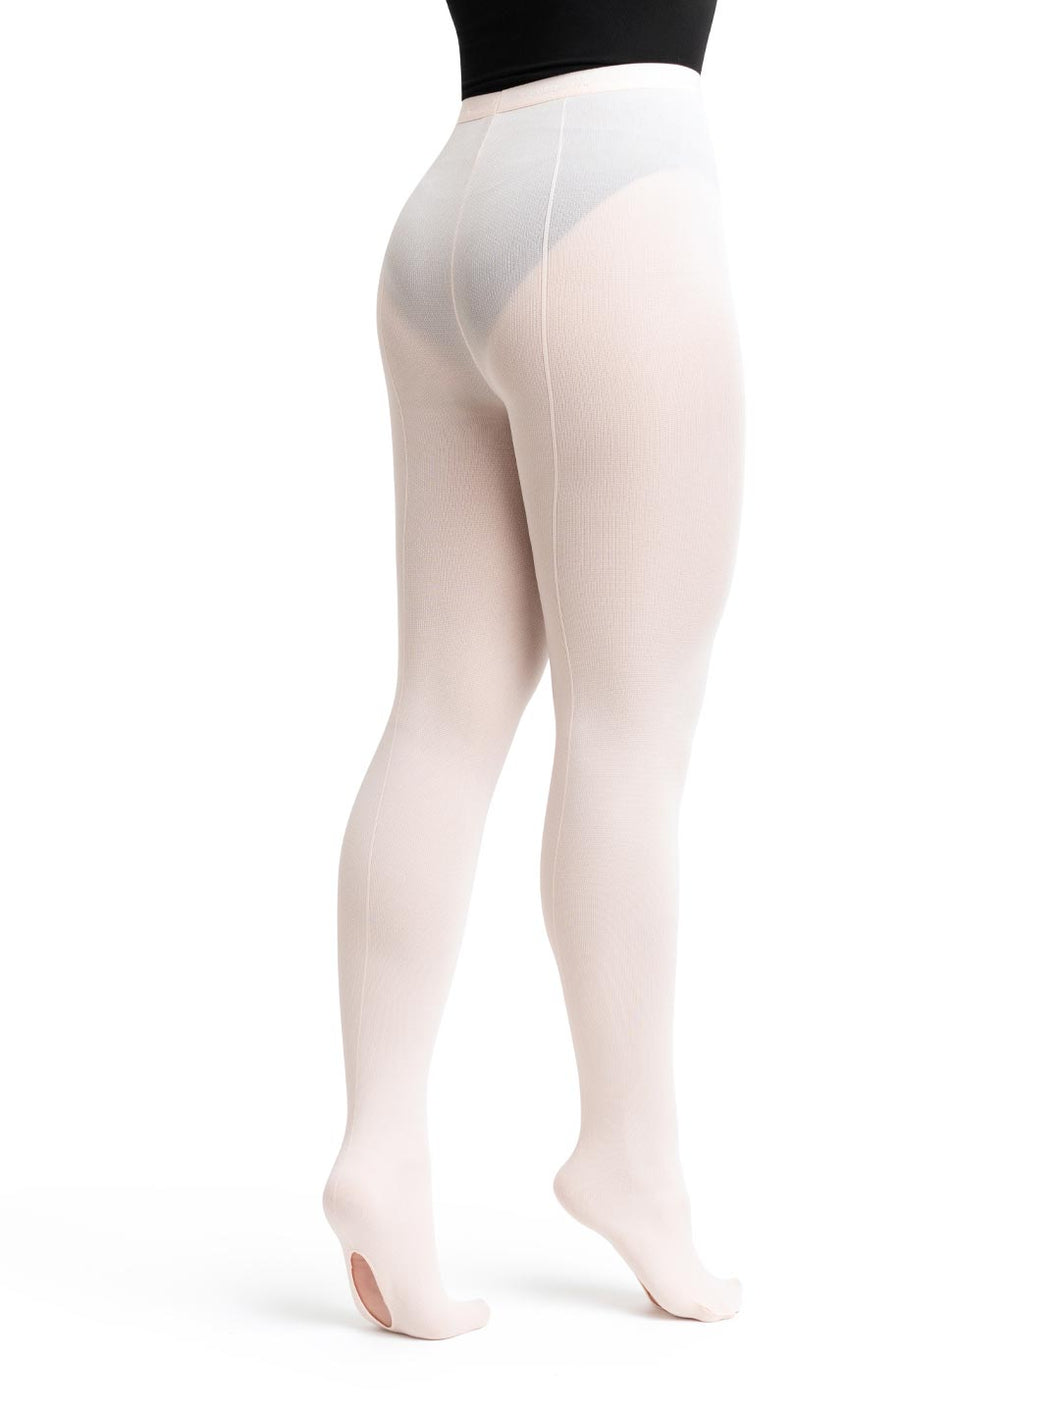 #9C Girl Professional Mesh Transition Tight with Seams by Capezio